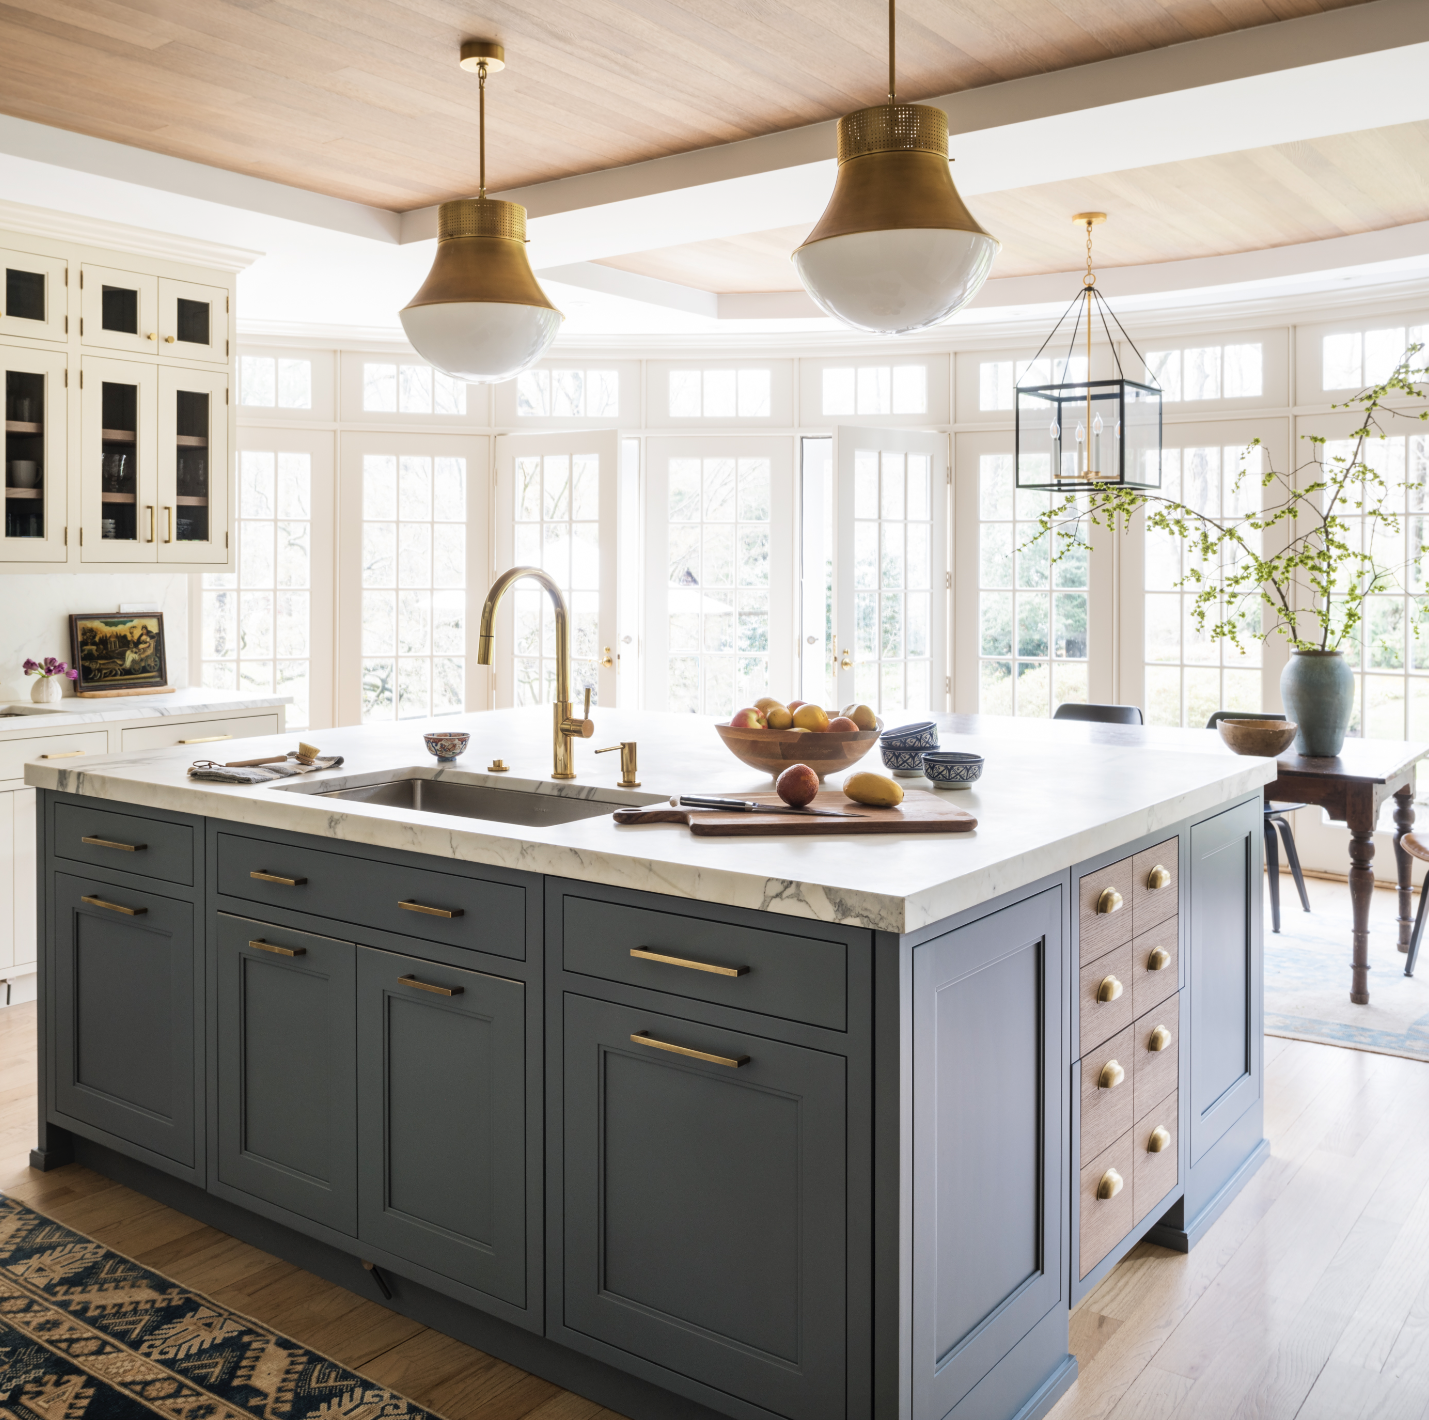 This Sun-Drenched Kitchen Got a Major Makeover Without Changing Its Footprint